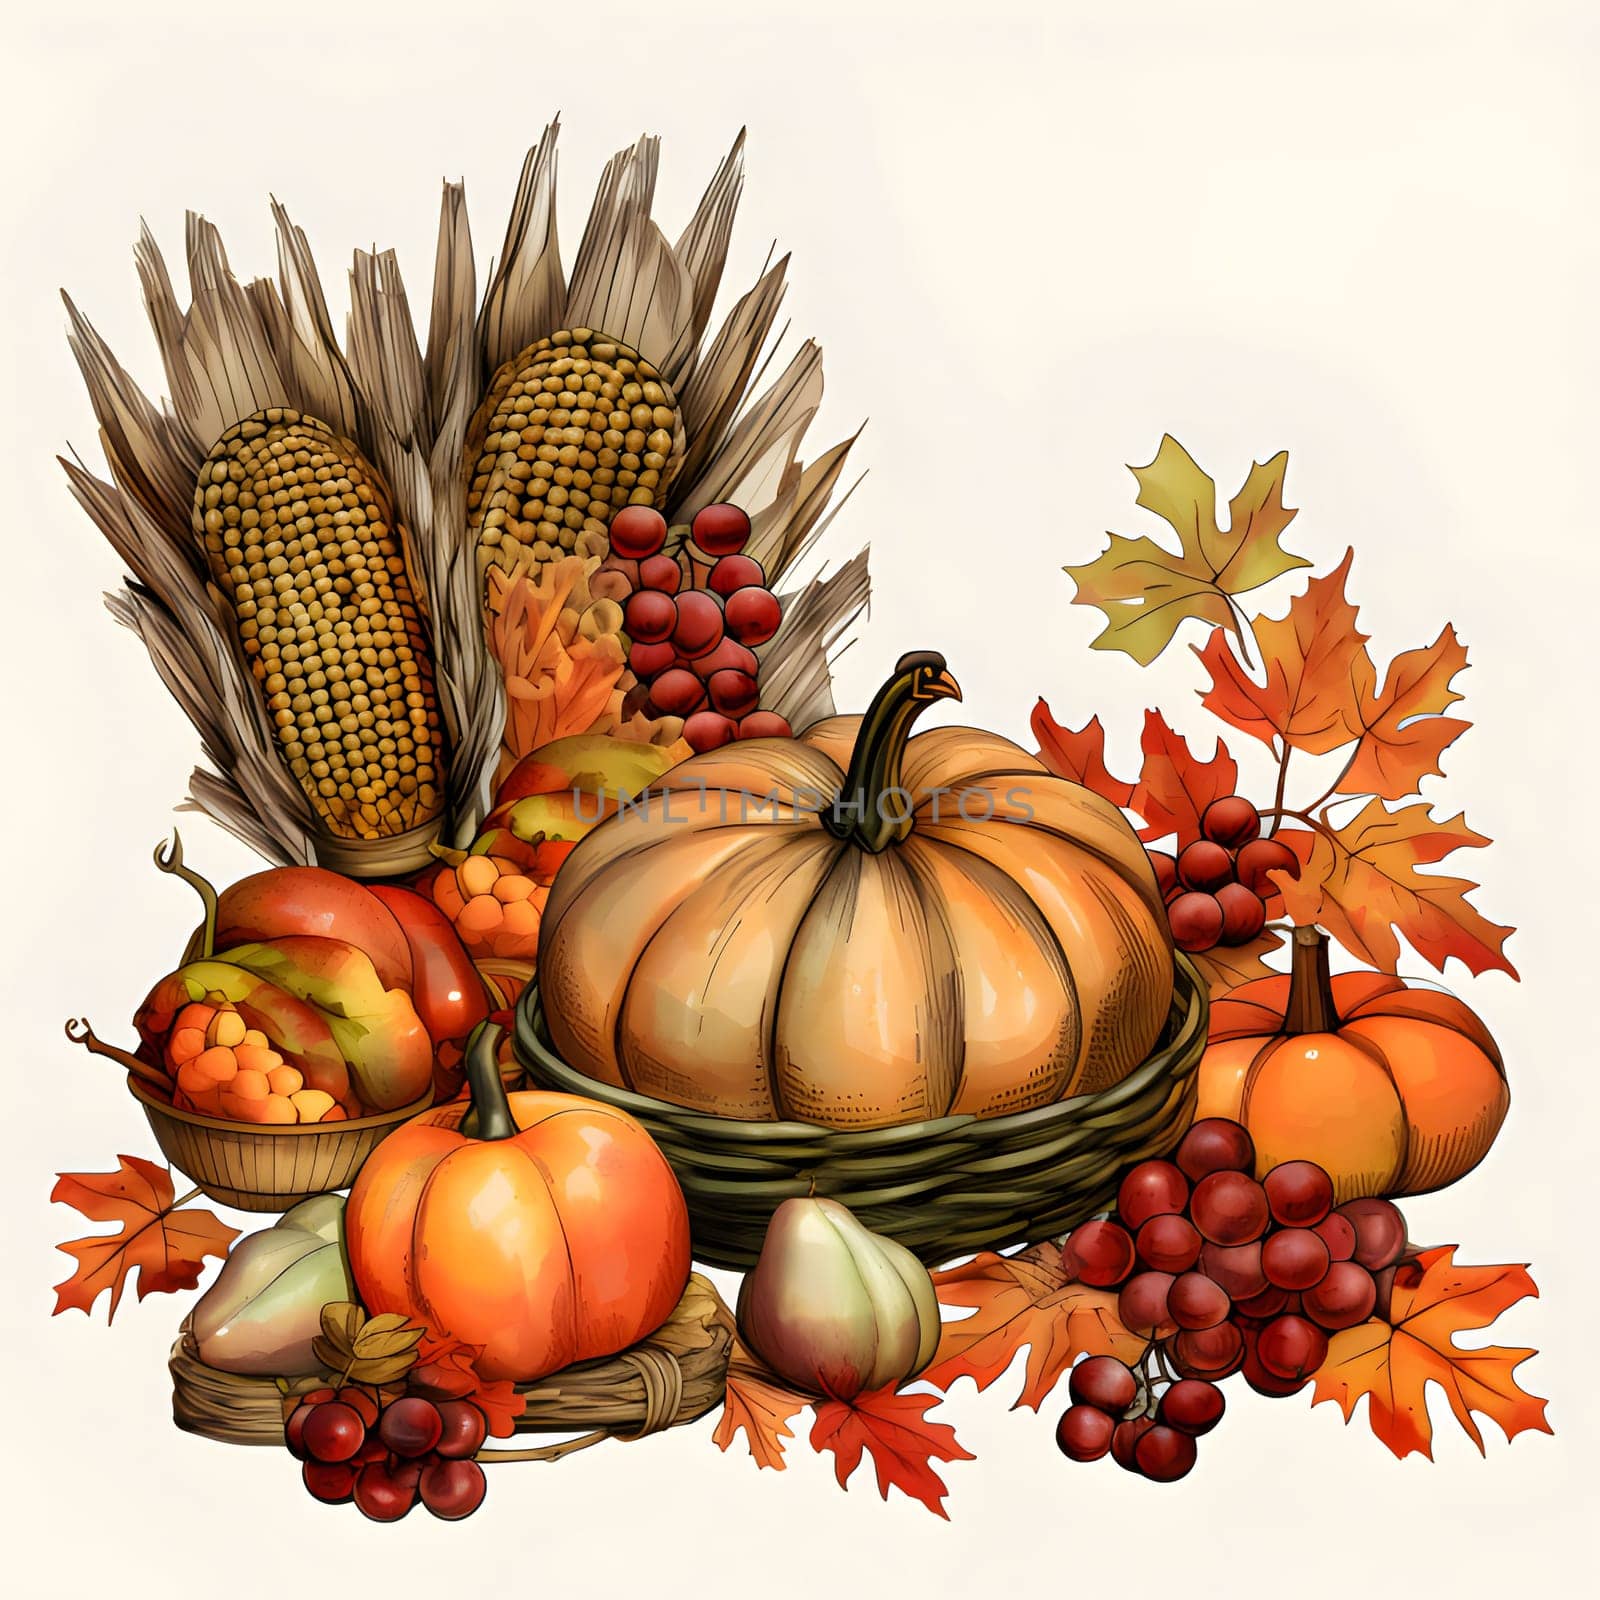 Pumpkins, leaves, grapes, corn. Corn as a dish of thanksgiving for the harvest, a picture on a white isolated background. An atmosphere of joy and celebration.